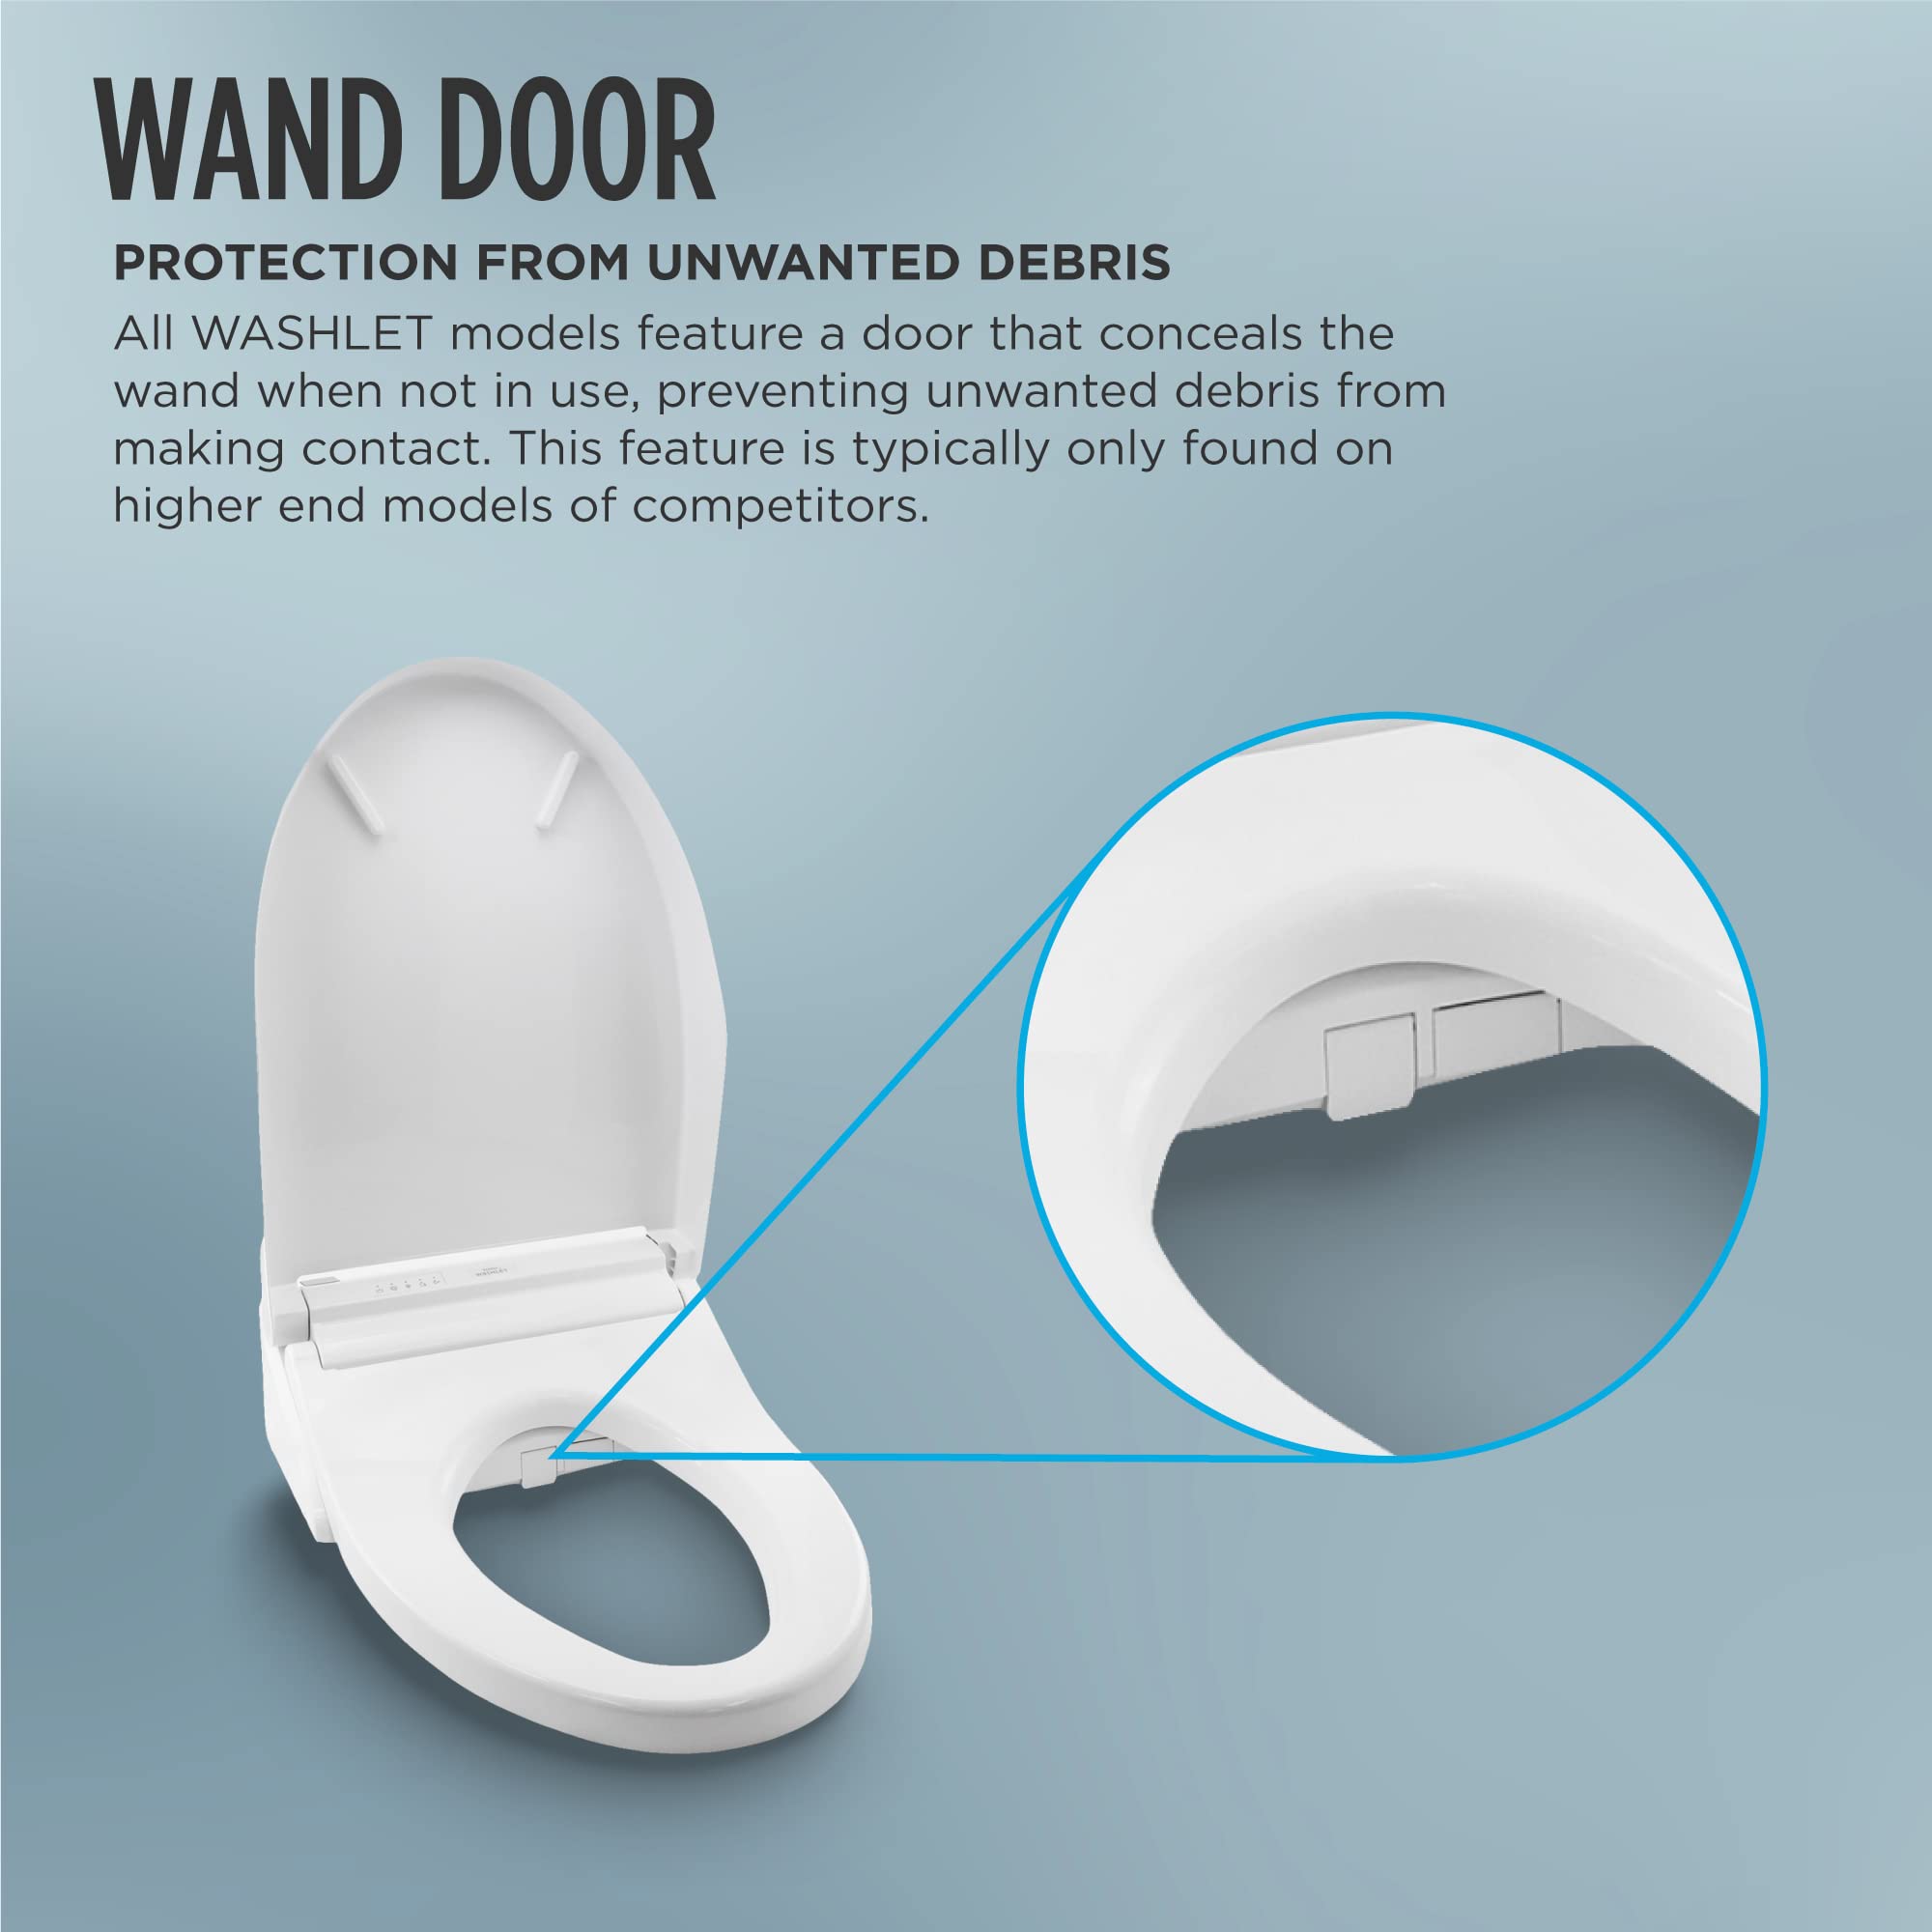 TOTO SW3084#01 WASHLET C5 Electronic Bidet Toilet Seat with PREMIST and EWATER+ Wand Cleaning, Elongated, Cotton White